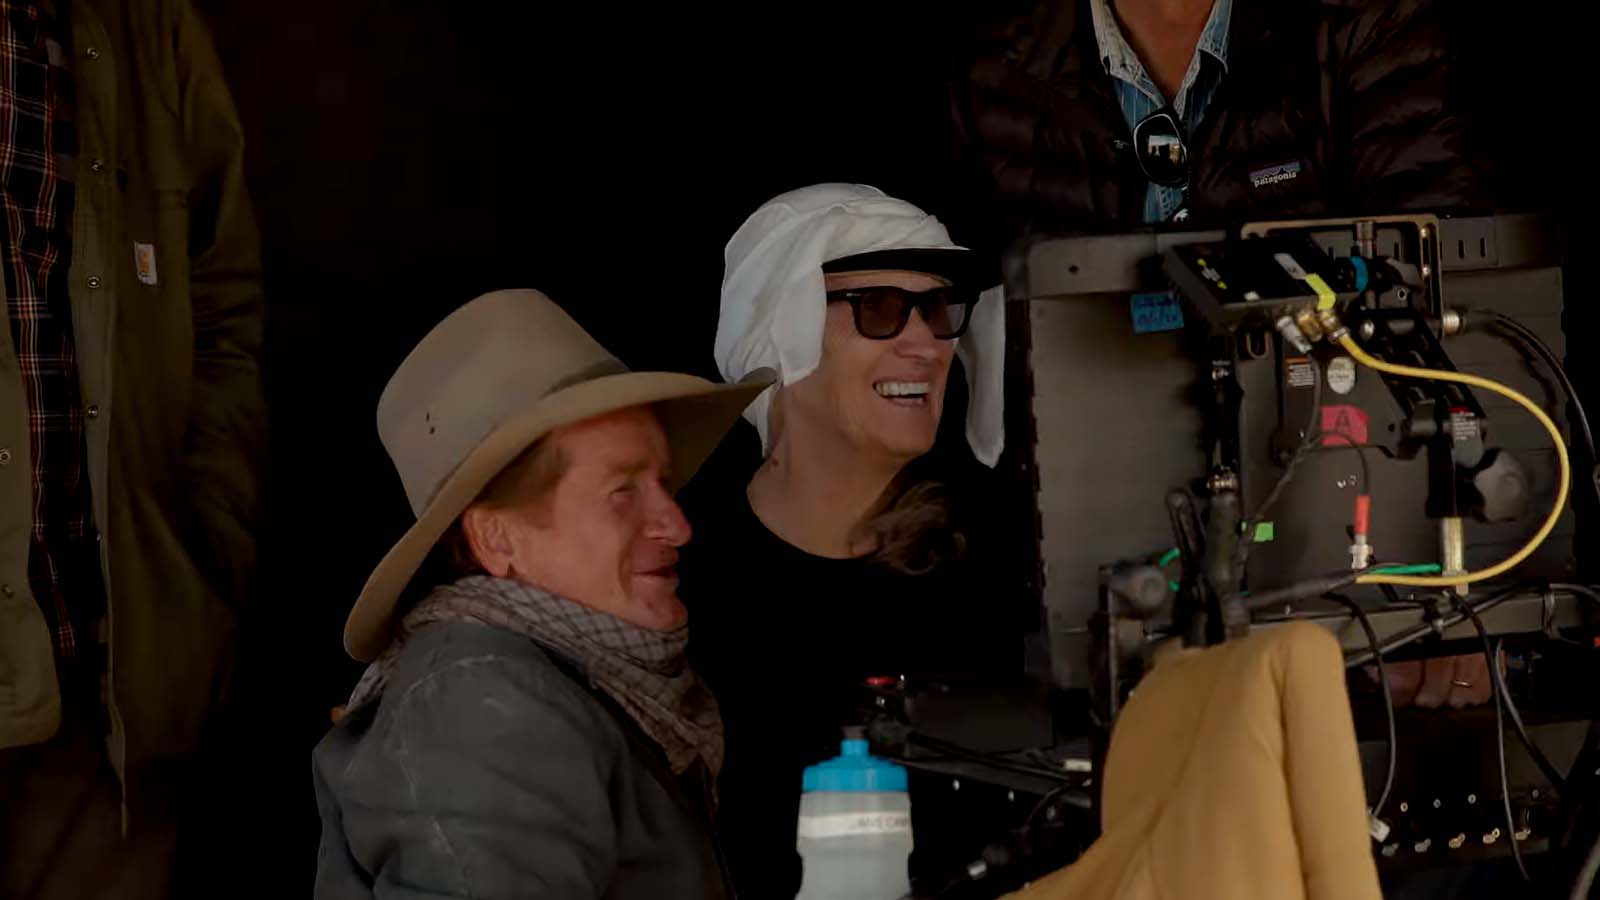 Jane Campion watches the monitor on location for The Power of the Dog. Image © Netflix